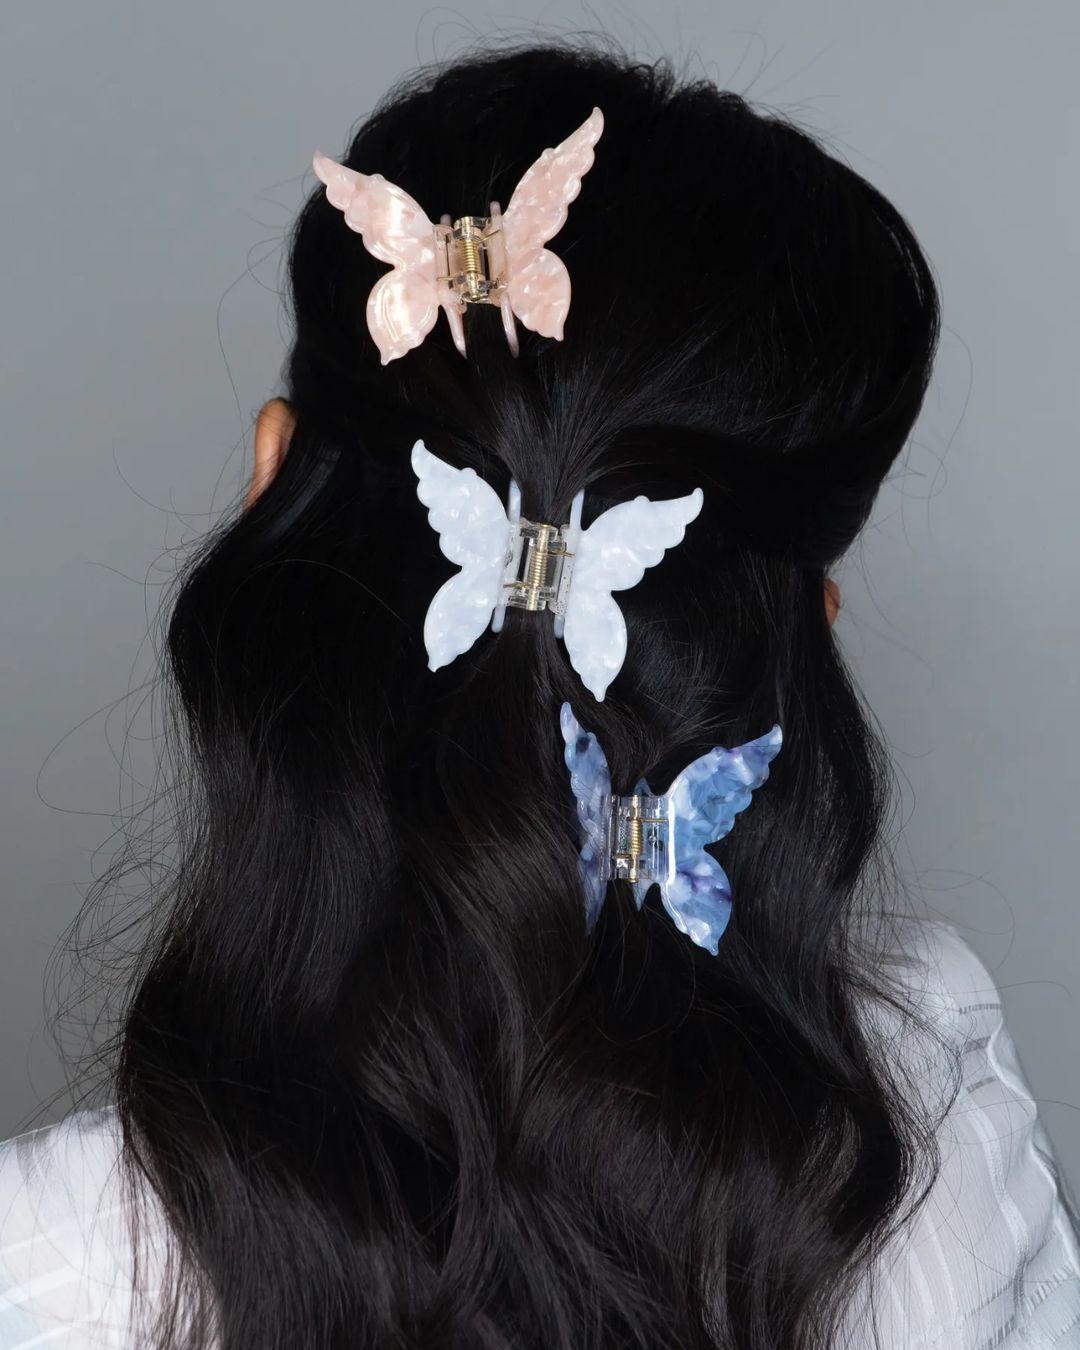 class="content__text"Our iconic You Give Me Butterflies butterfly claw clips are restocked just for the holidays! Get this exclusive FREE GWP with your $80 purchase, use code THANKFUL 🦋

@alicieaher wearing butterfly claw clips

#neverlimityourselfexpression #clawclip #blackfridaysale #blackfridaydeals #winterhairstyles